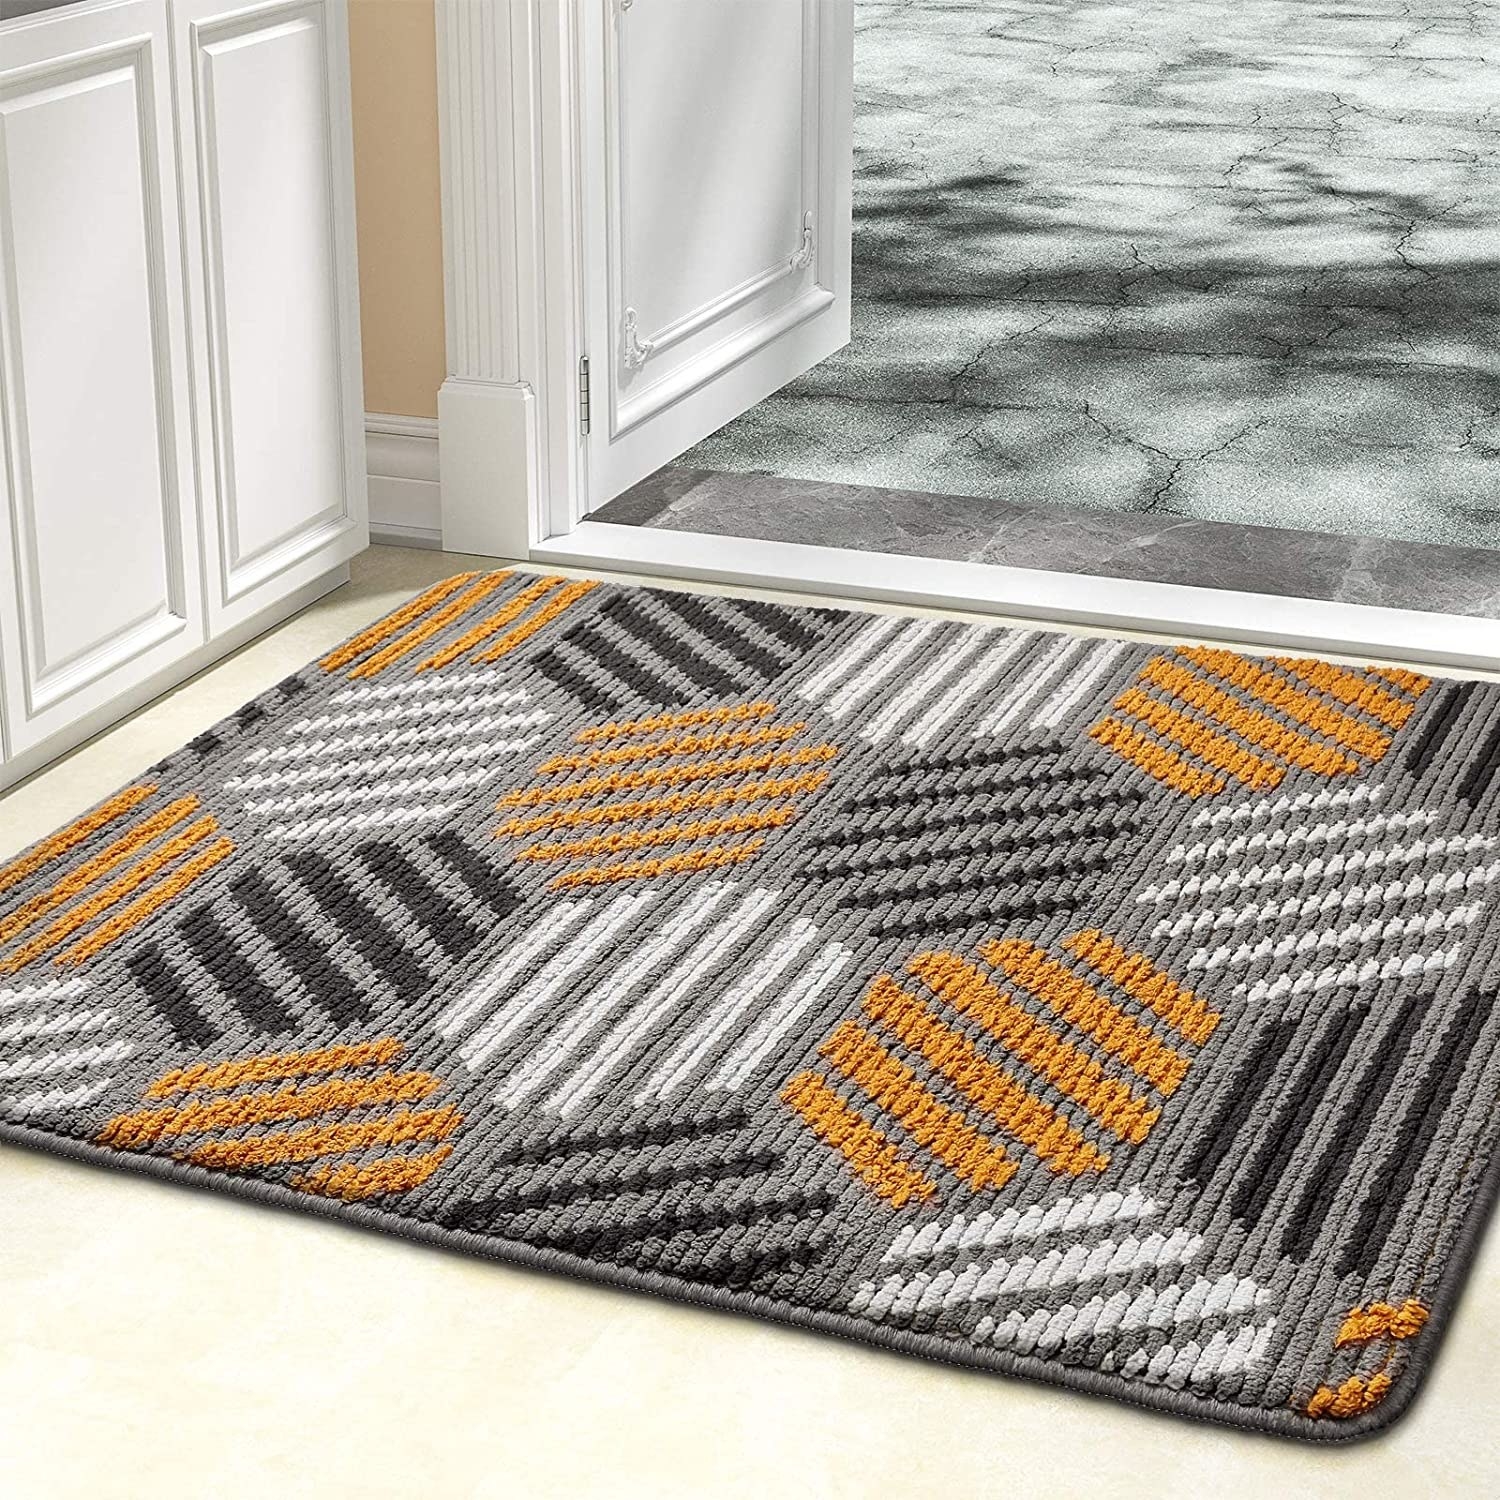 a large entryway mat by a front door